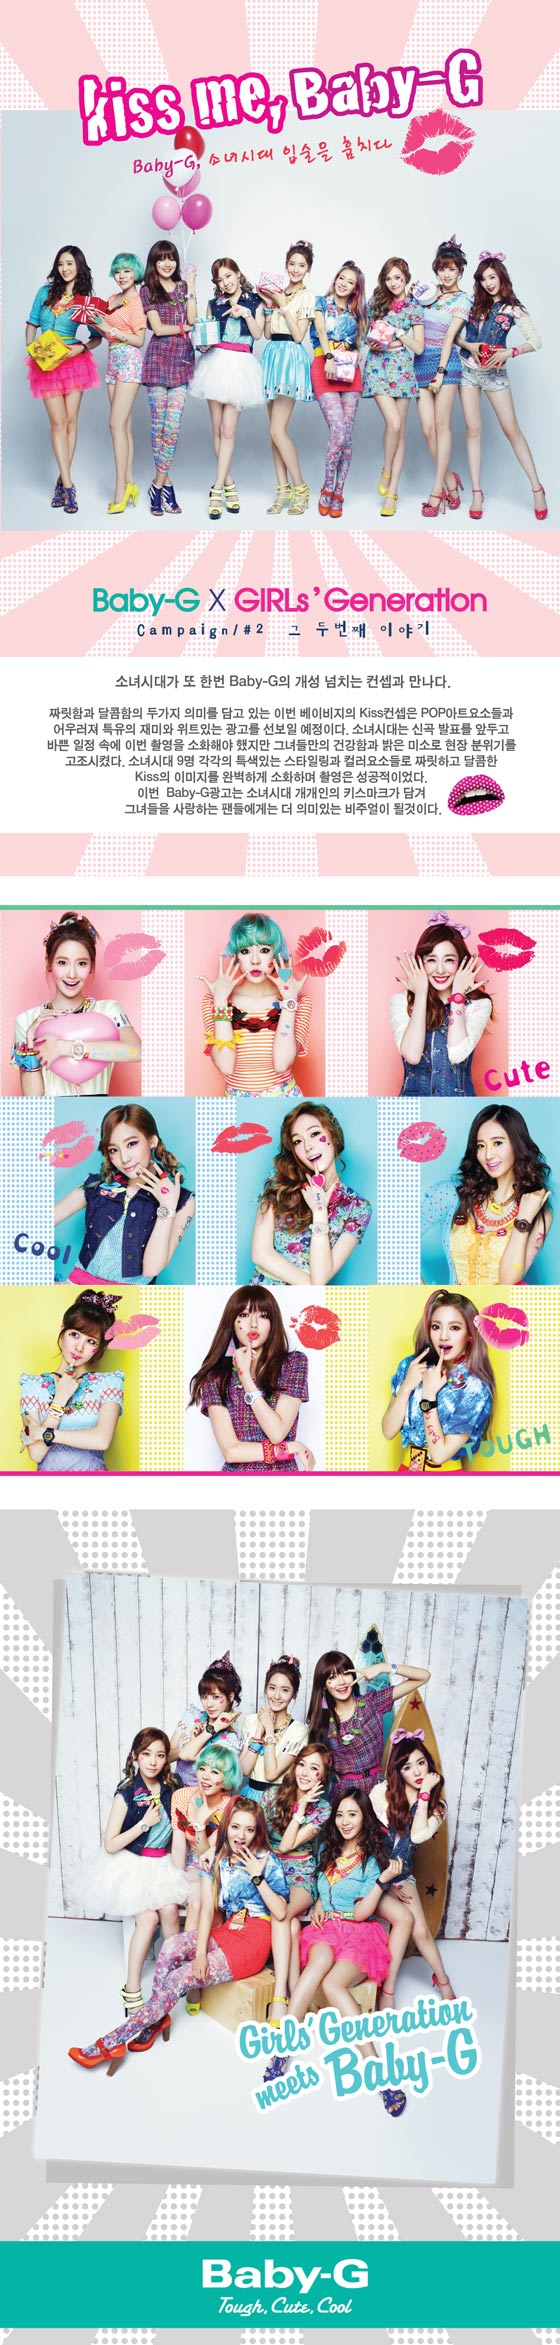 Snsd Kiss Me Baby G campaign